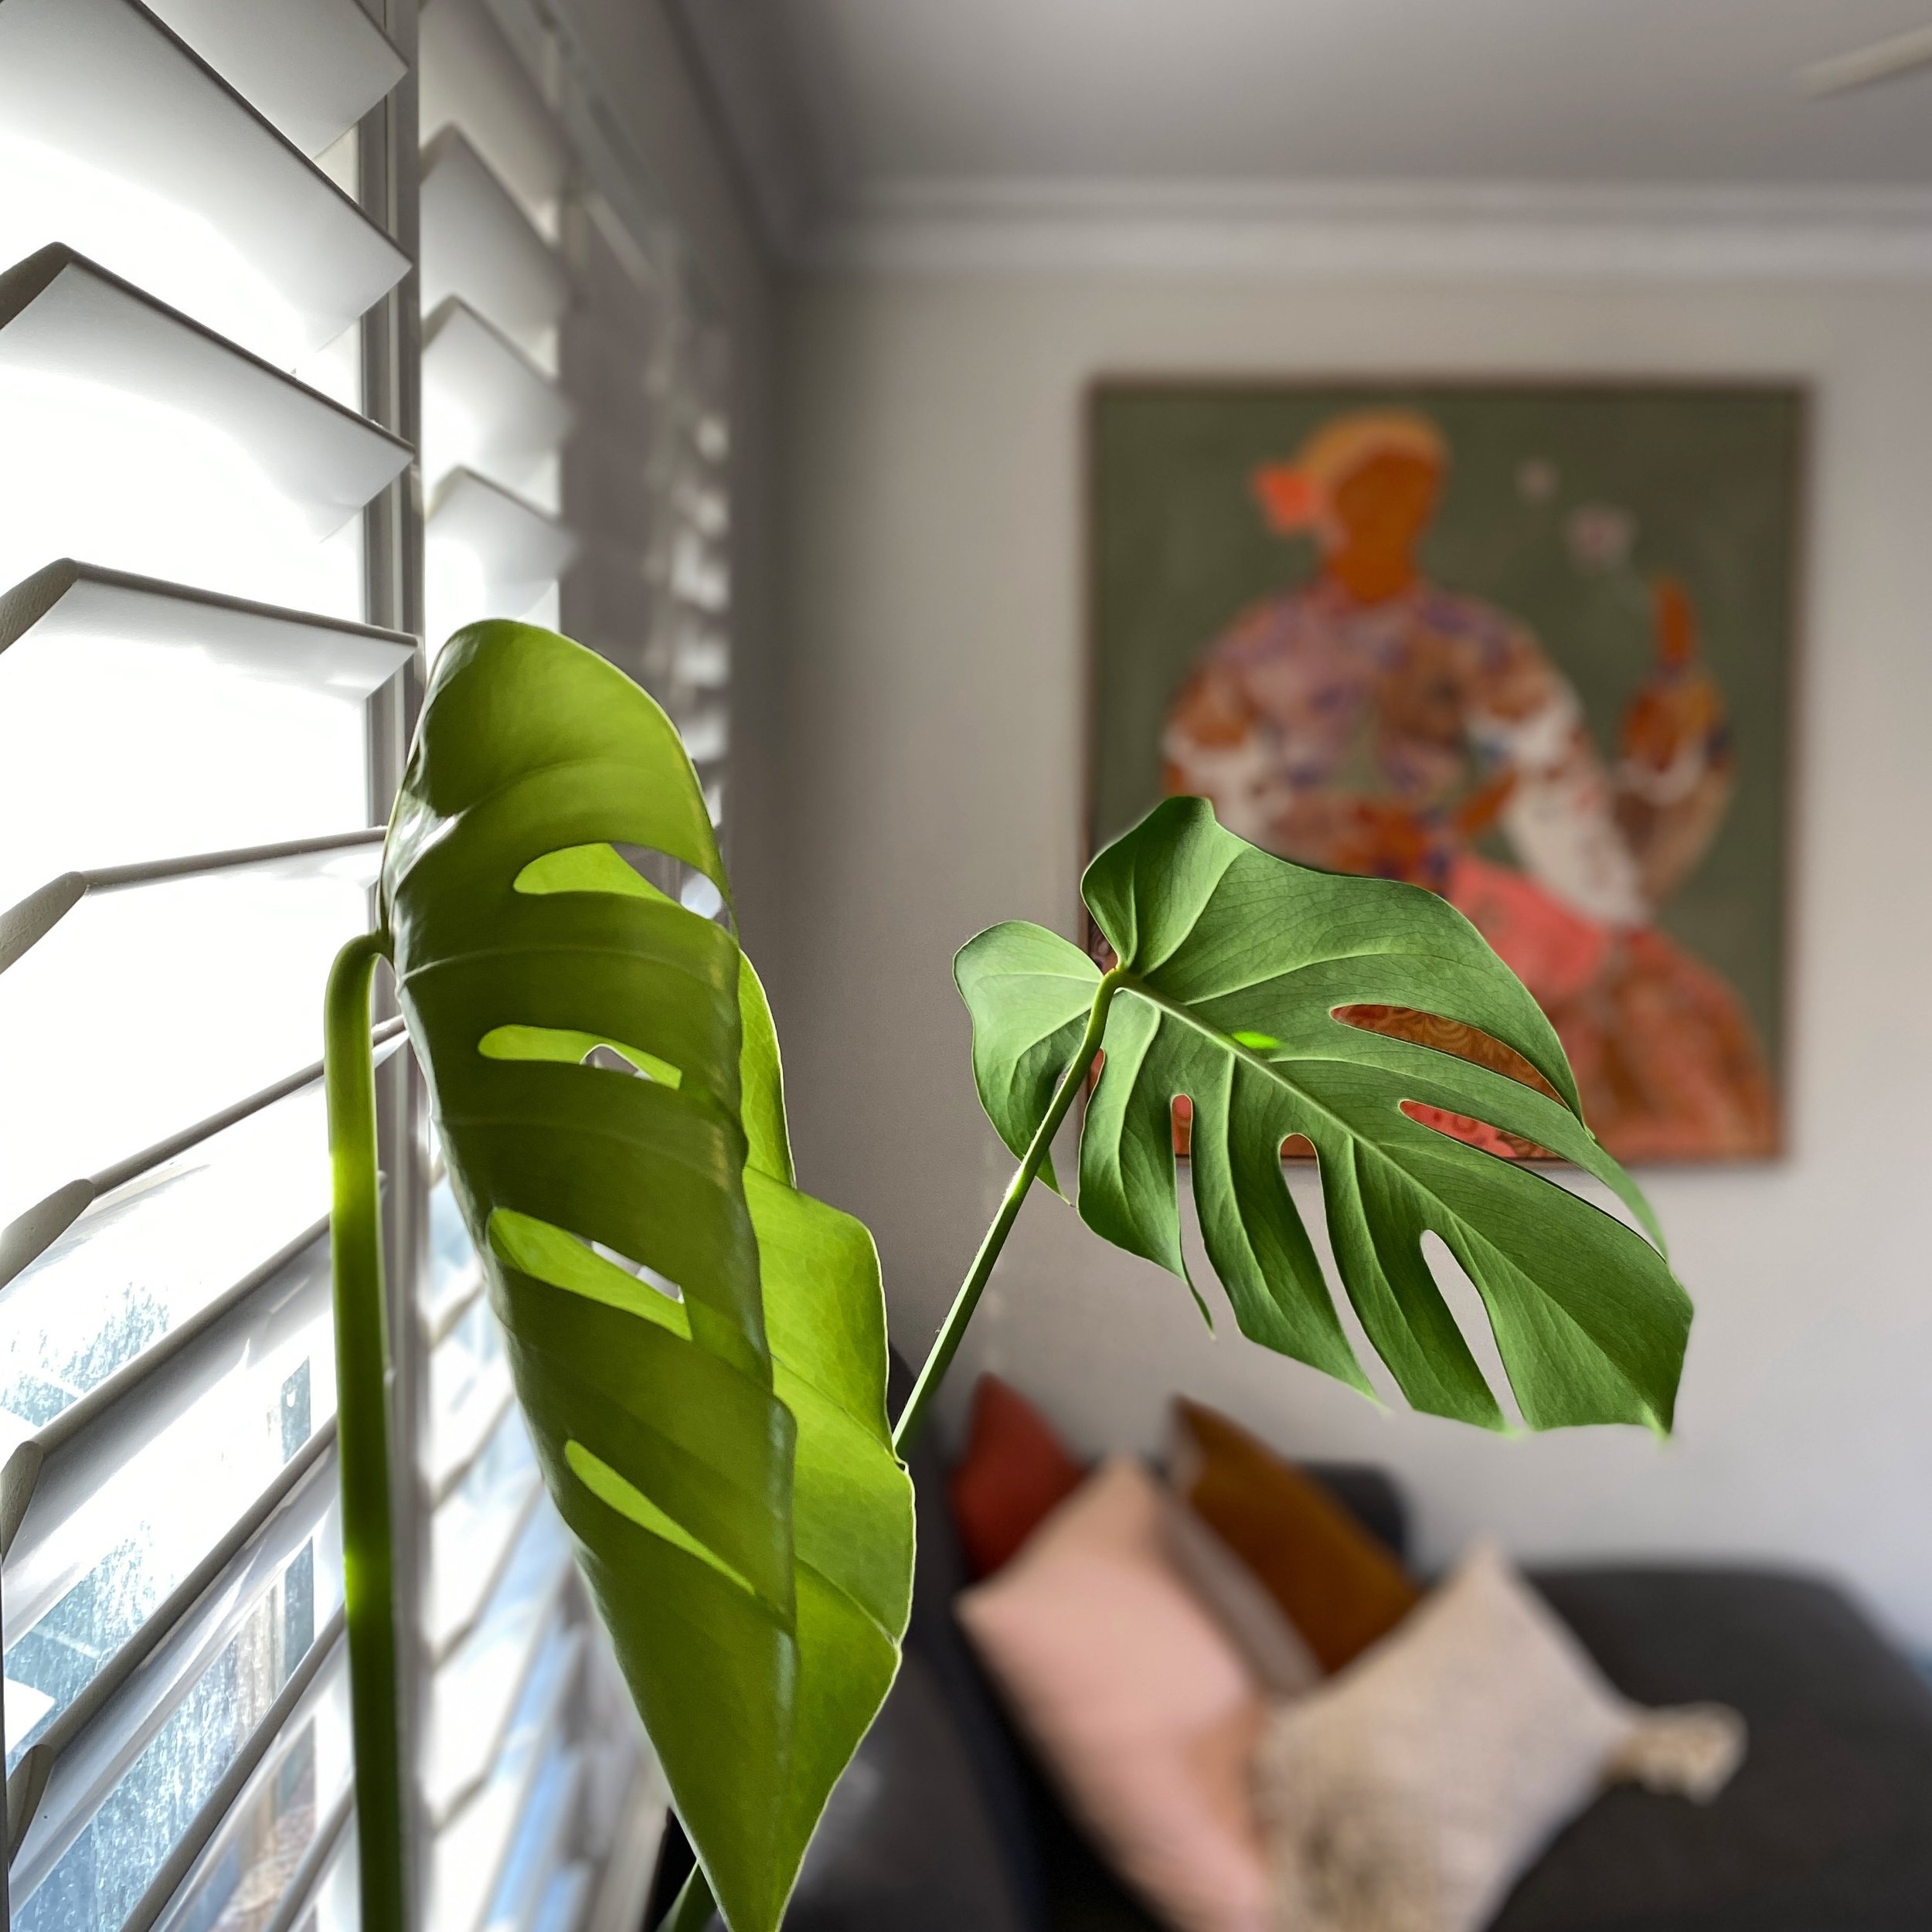 Transform your lounge with Monstera, new artwork, and cozy cushions. #loungeroomvibes

Seeking styling assistance or a color refresh for your space? Let's connect!

&nbsp; &nbsp; &nbsp; &nbsp; &nbsp; &nbsp;Kirsten&nbsp;
📱0404 027 942

www.roomshaker